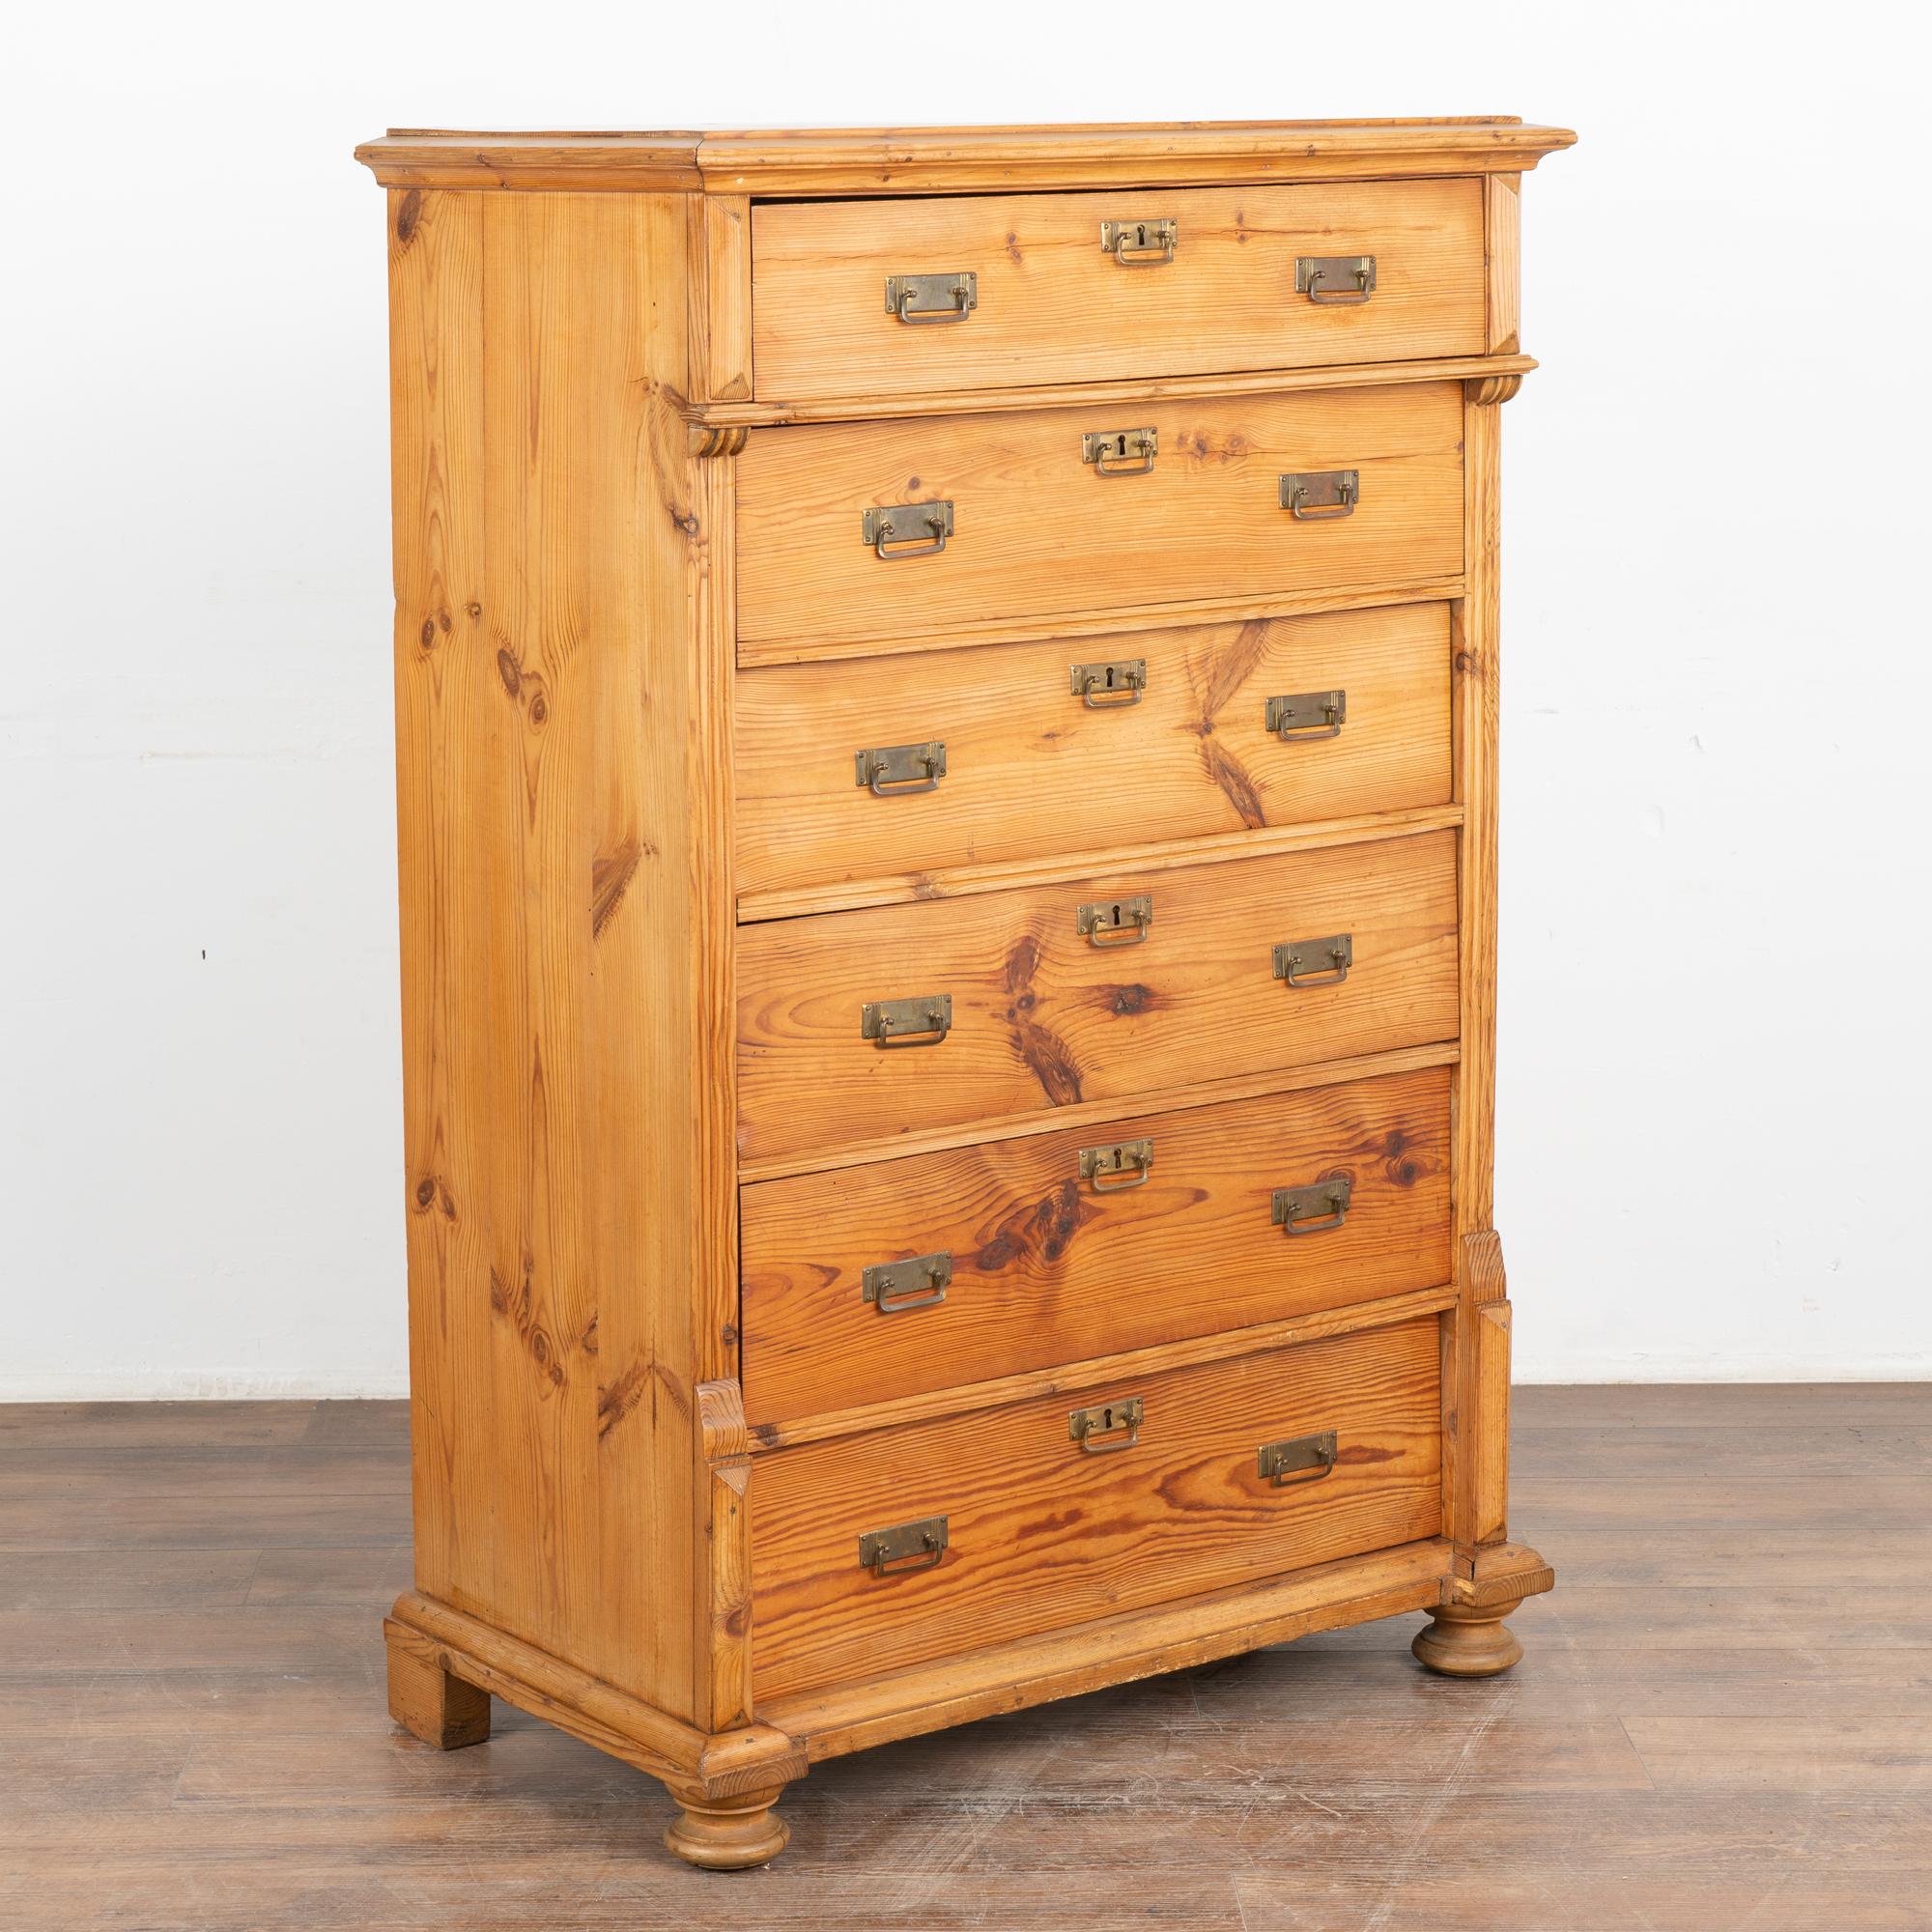 This antique pine chest of drawers or 